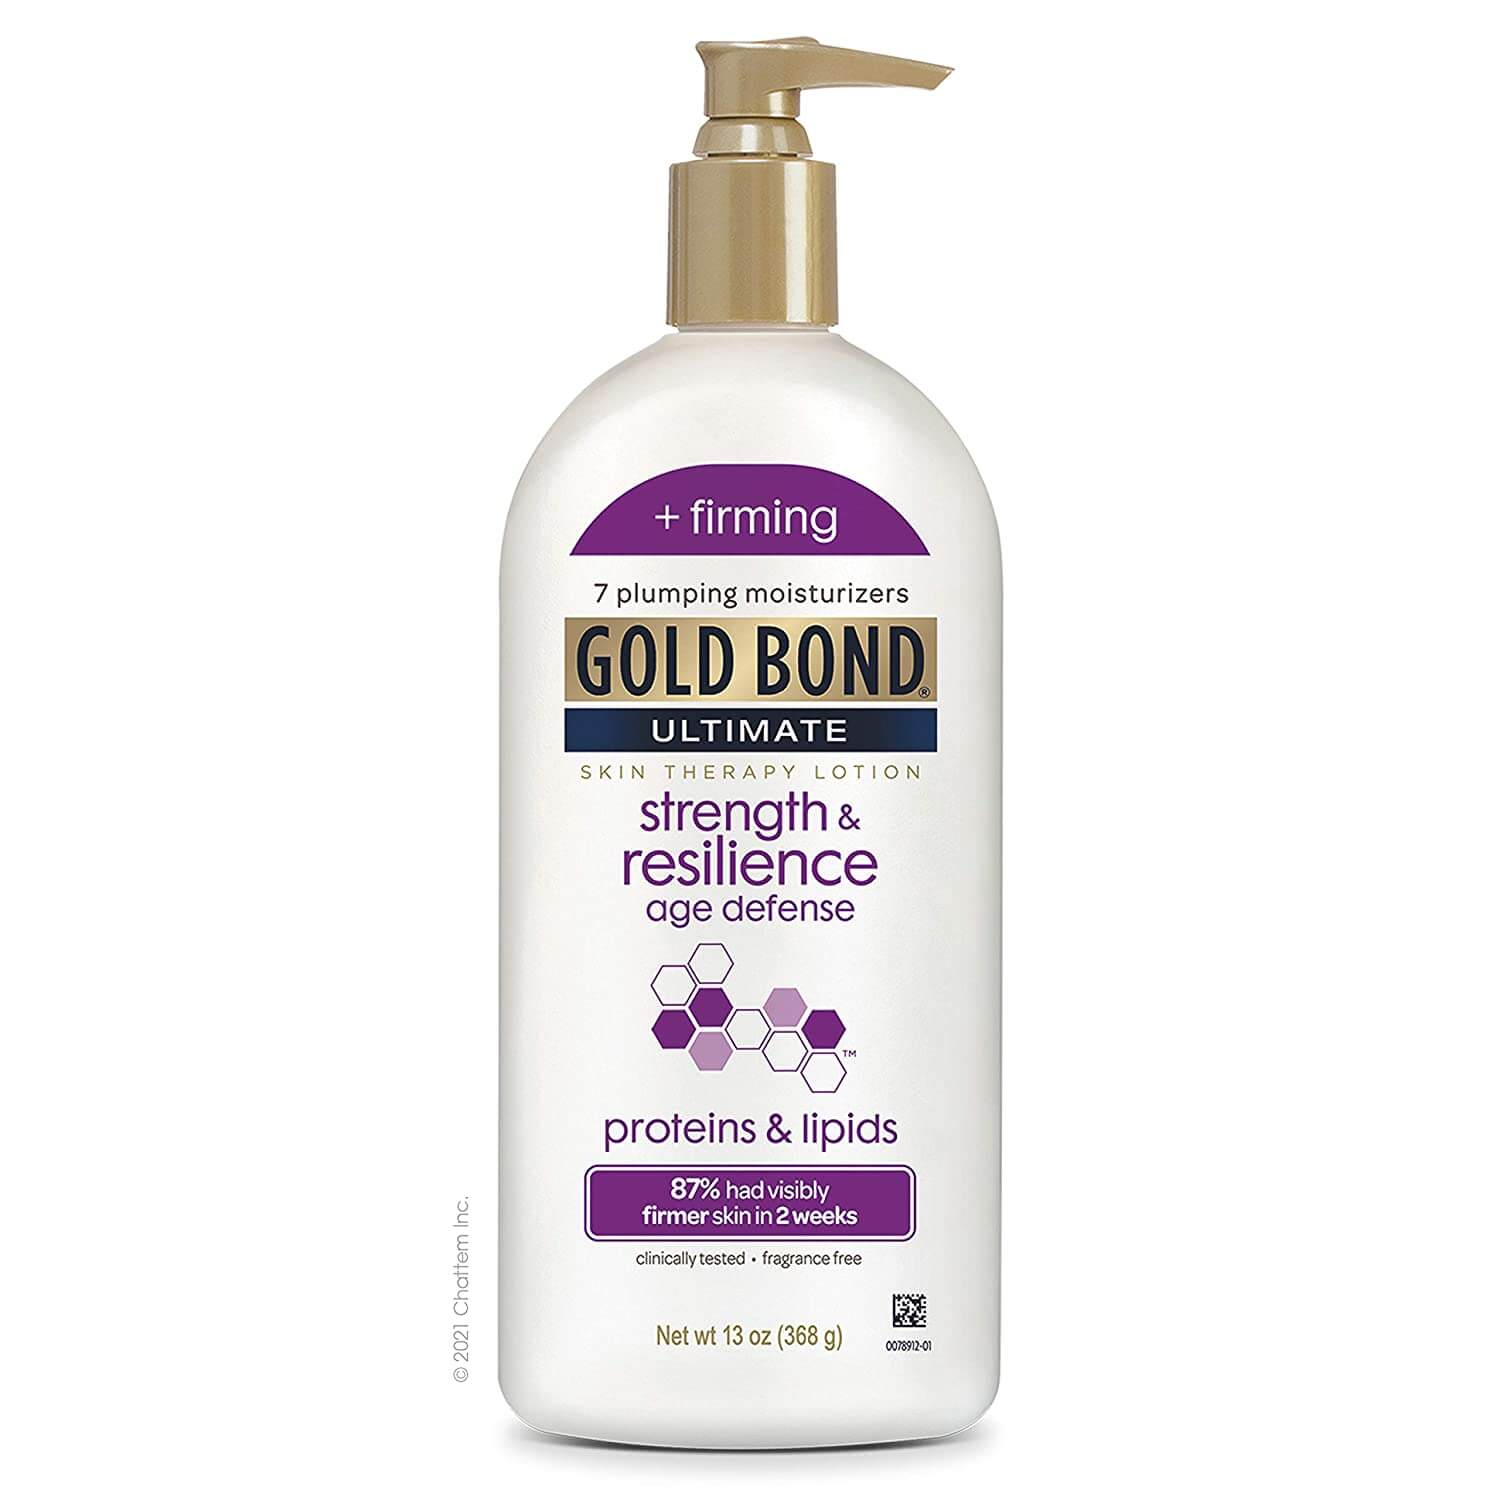 Gold Bond Ultimate Strength & Resilience Skin Therapy Lotion